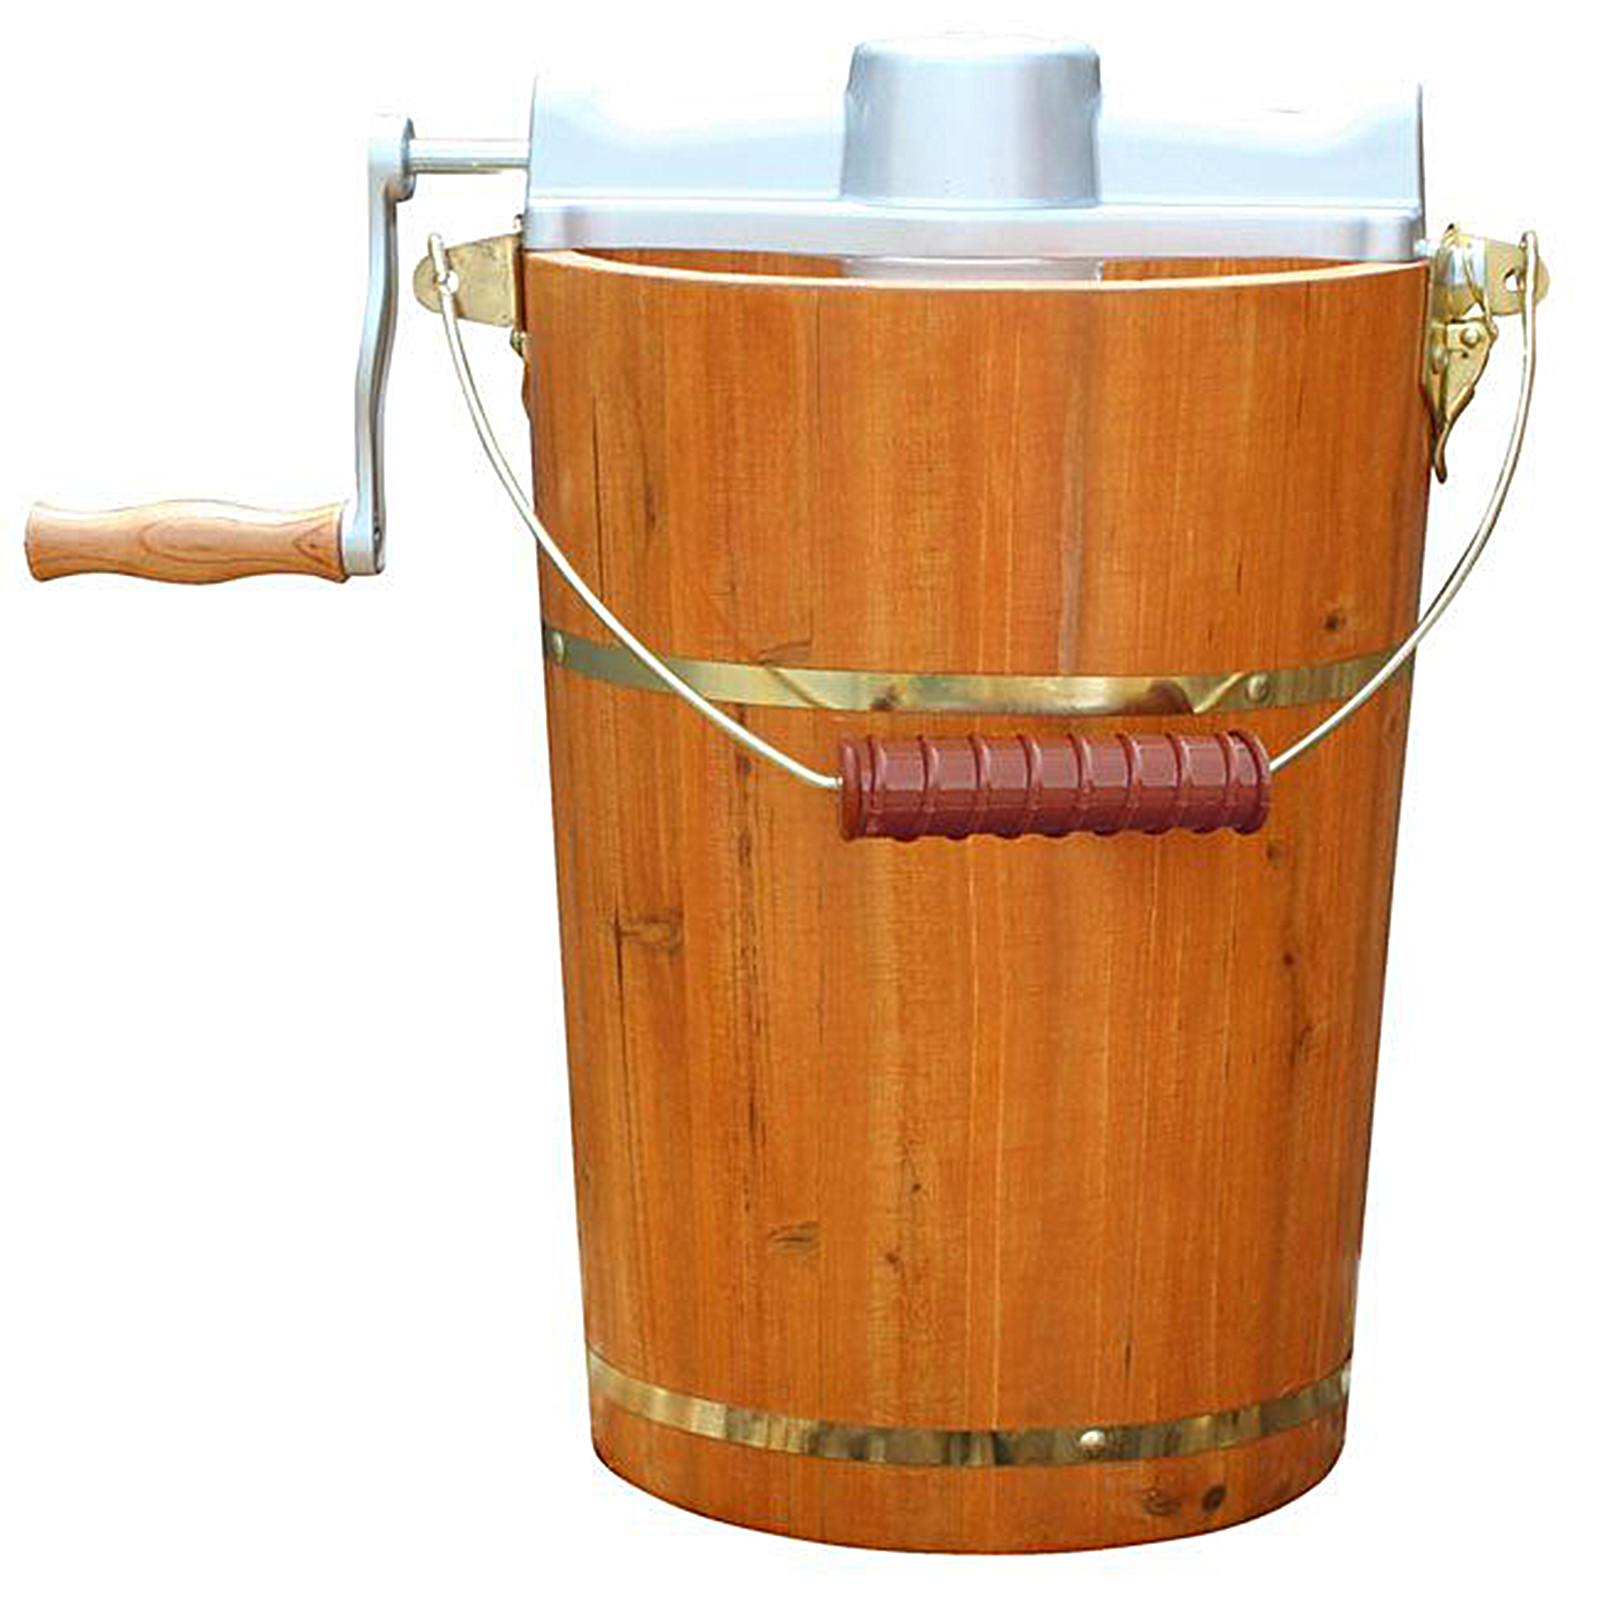 6 Quart Electric or Hand Operated Ice Cream Maker